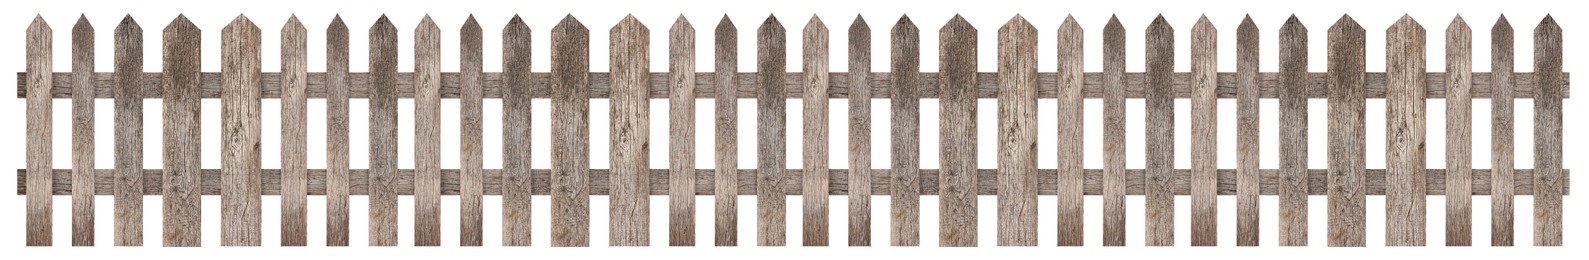 Image of Wooden fence isolated on white. Enclosing structure